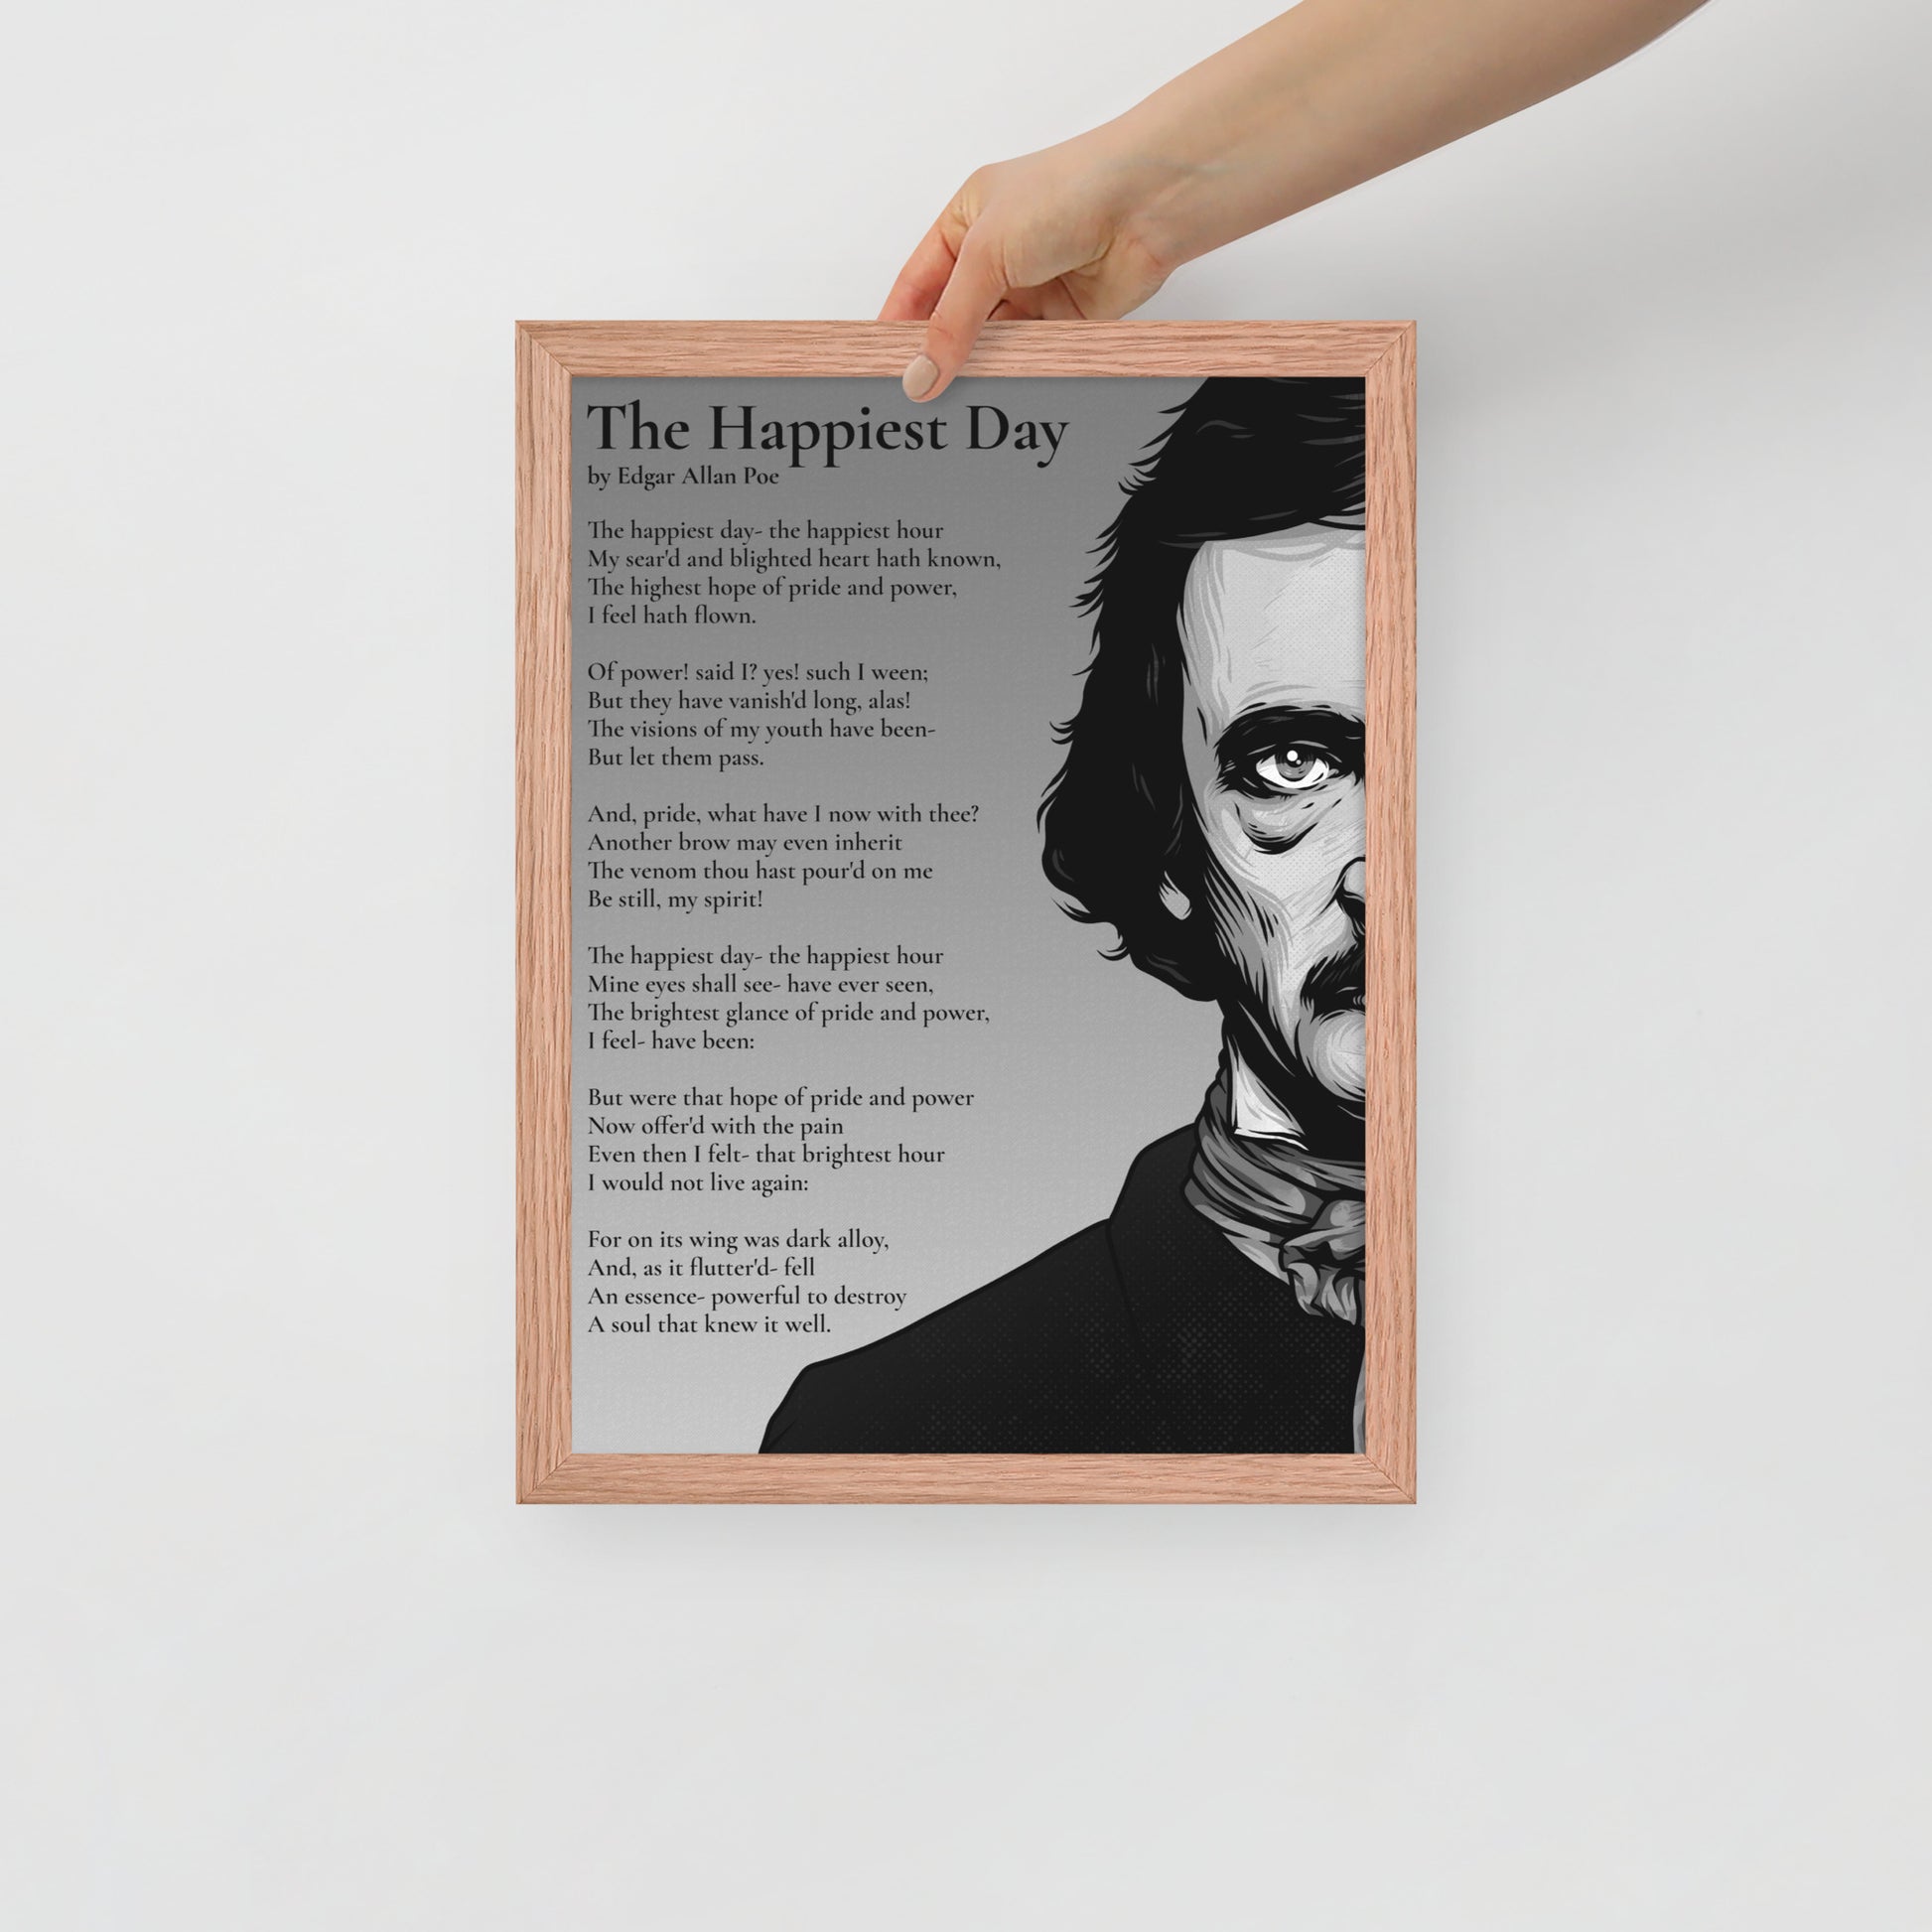 Edgar Allan Poe's 'The Happiest Day' Framed Matted Poster - 12 x 16 Red Oak Frame